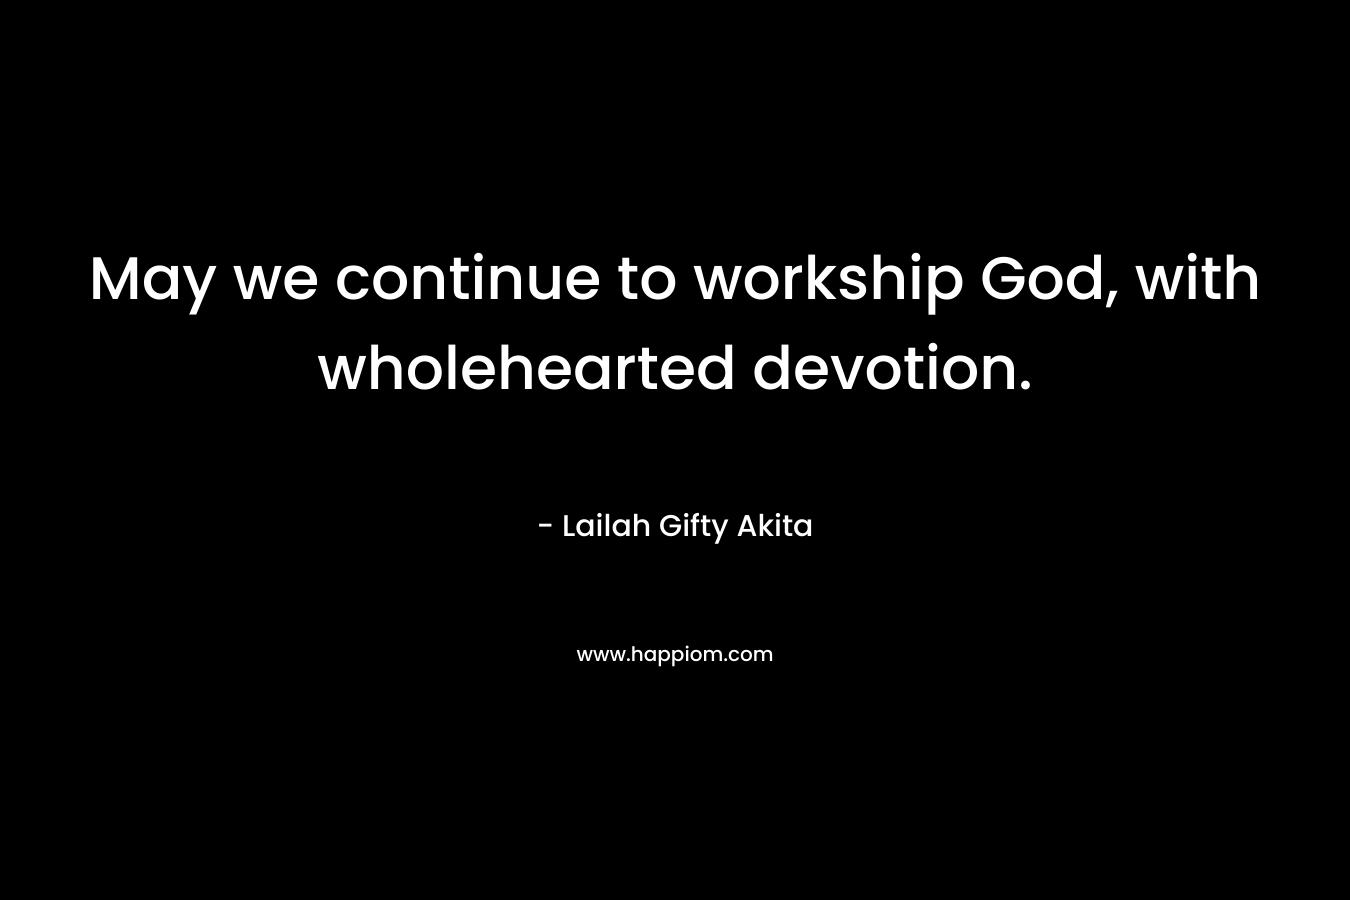 May we continue to workship God, with wholehearted devotion.